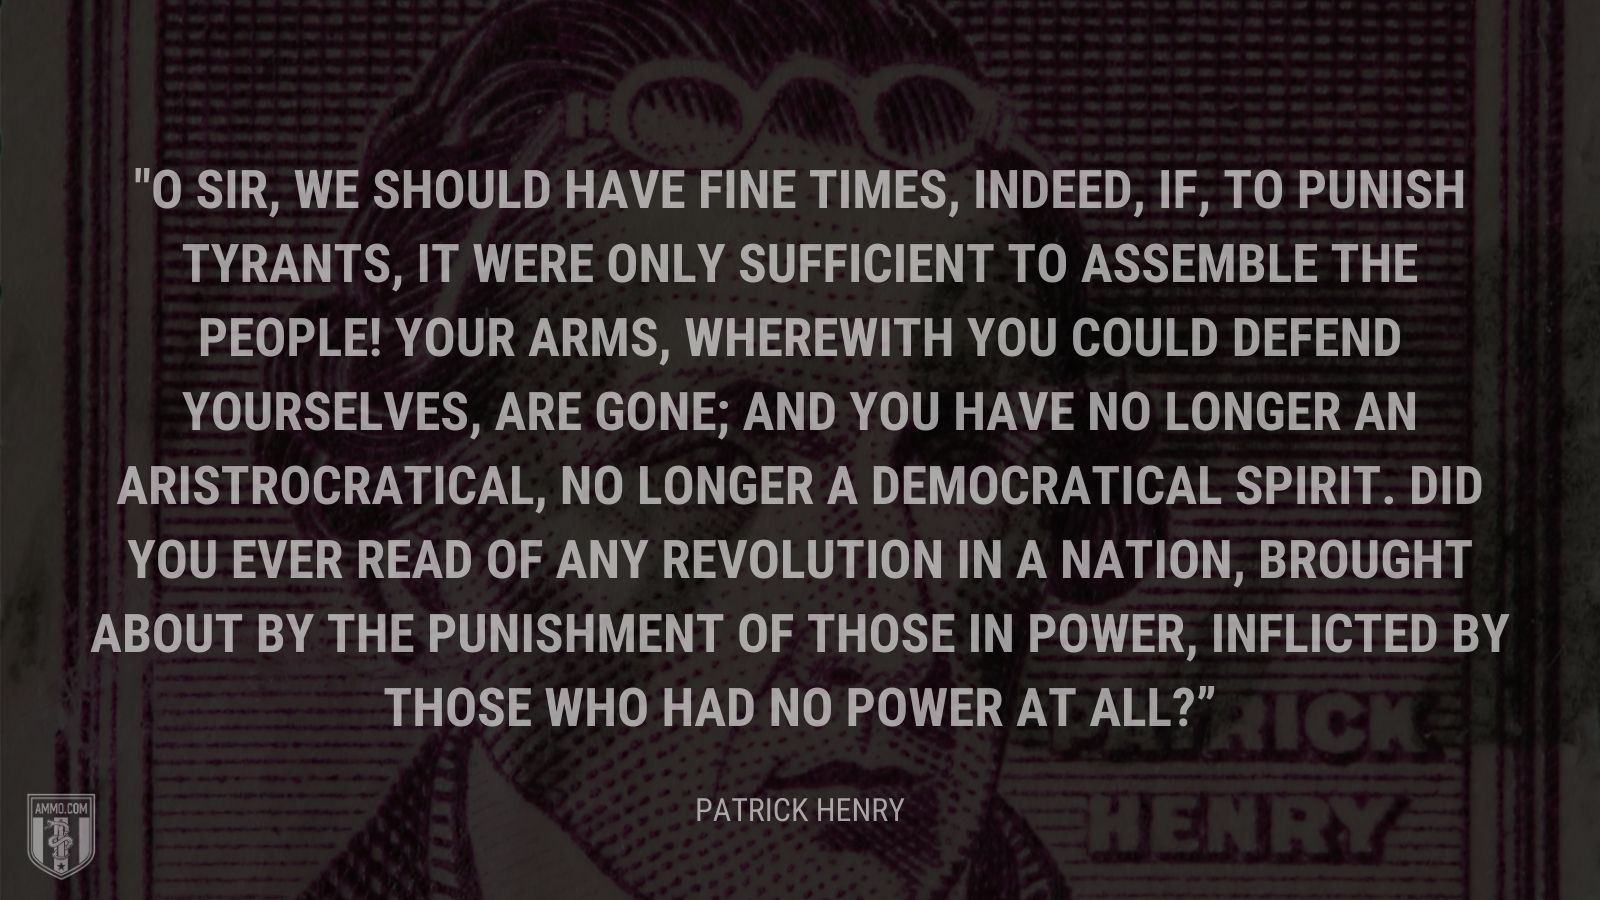 “O sir, we should have fine times, indeed, if, to punish tyrants, it were only sufficient to assemble the people! Your arms, wherewith you could defend yourselves, are gone; and you have no longer an aristrocratical, no longer a democratical spirit. Did you ever read of any revolution in a nation, brought about by the punishment of those in power, inflicted by those who had no power at all?” - Patrick Henry